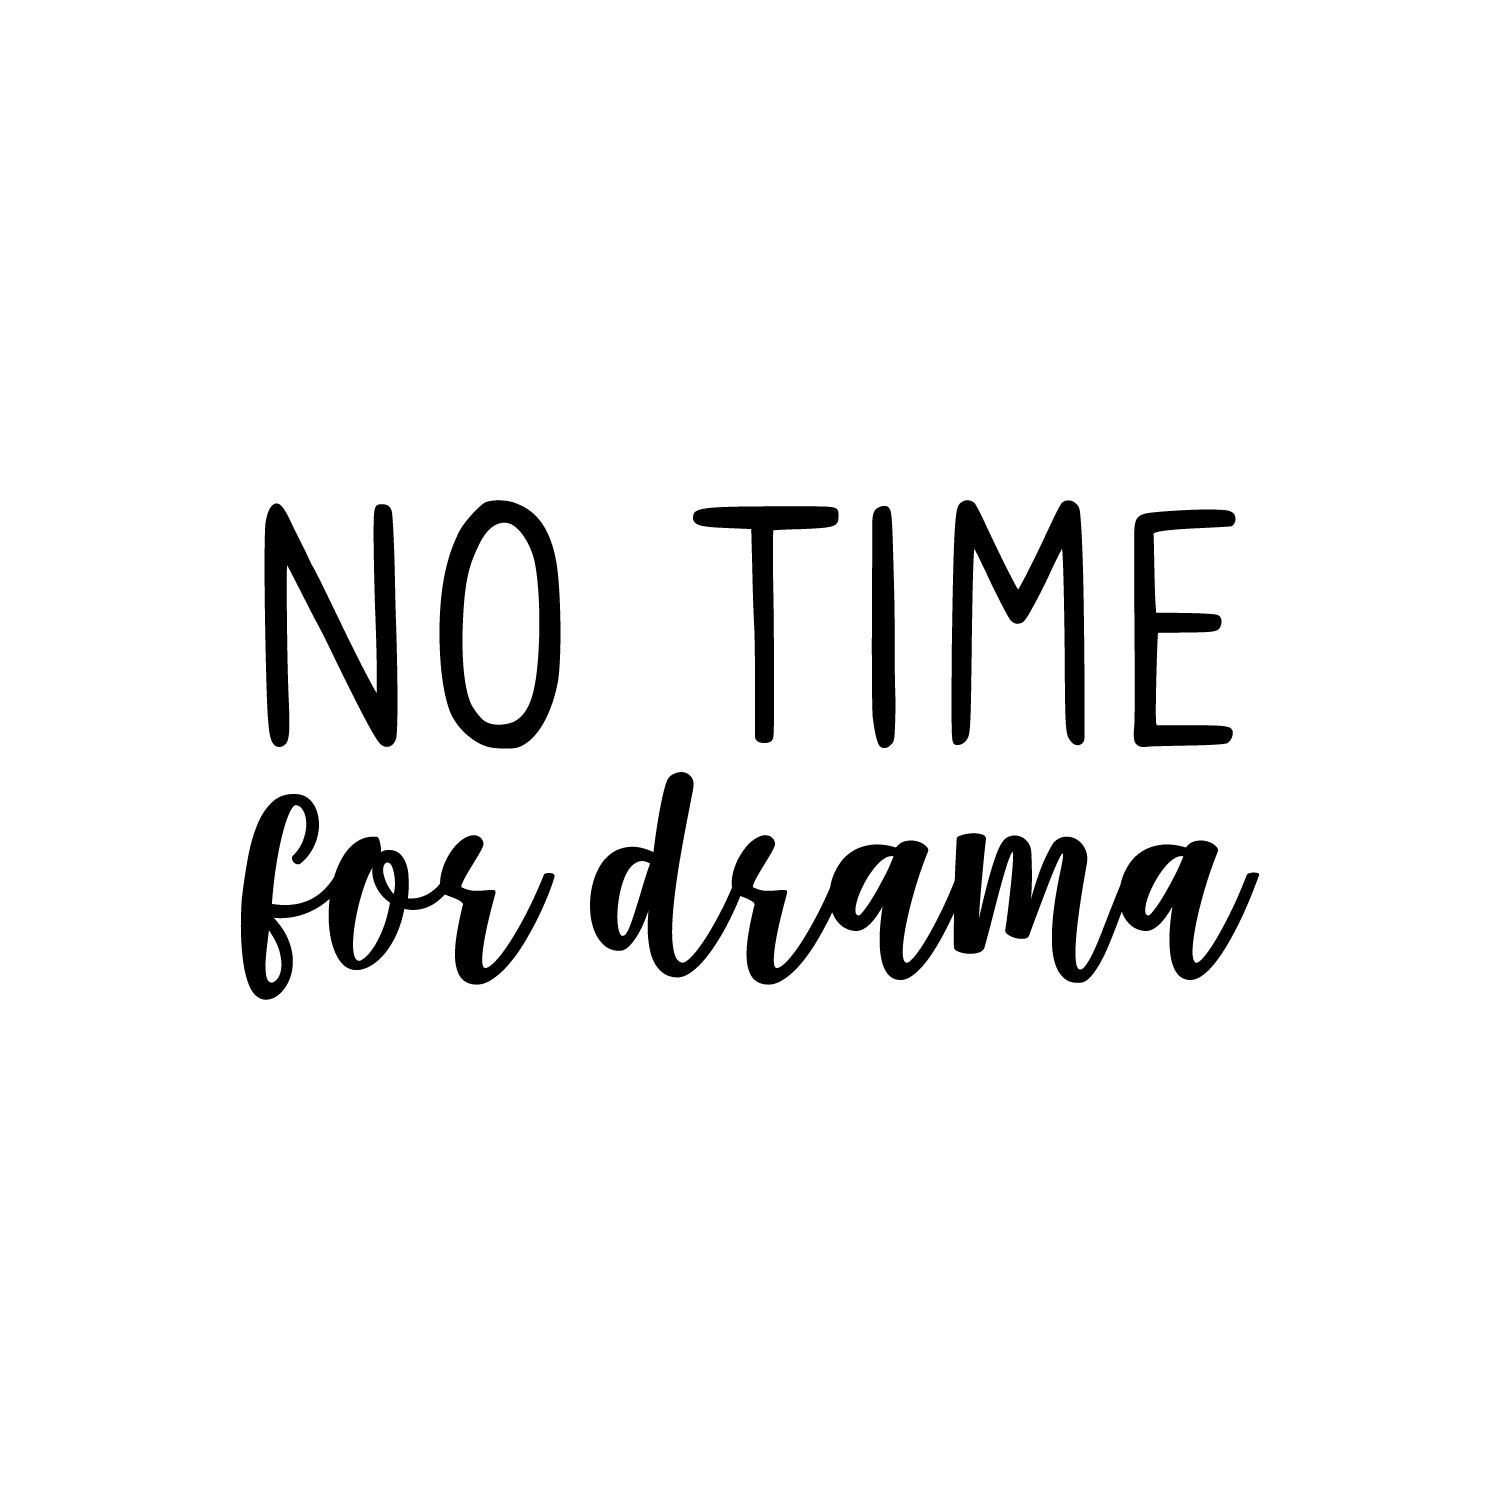 Vinyl Wall Art Decal - No Time For Drama - 11* x 22* - Trendy